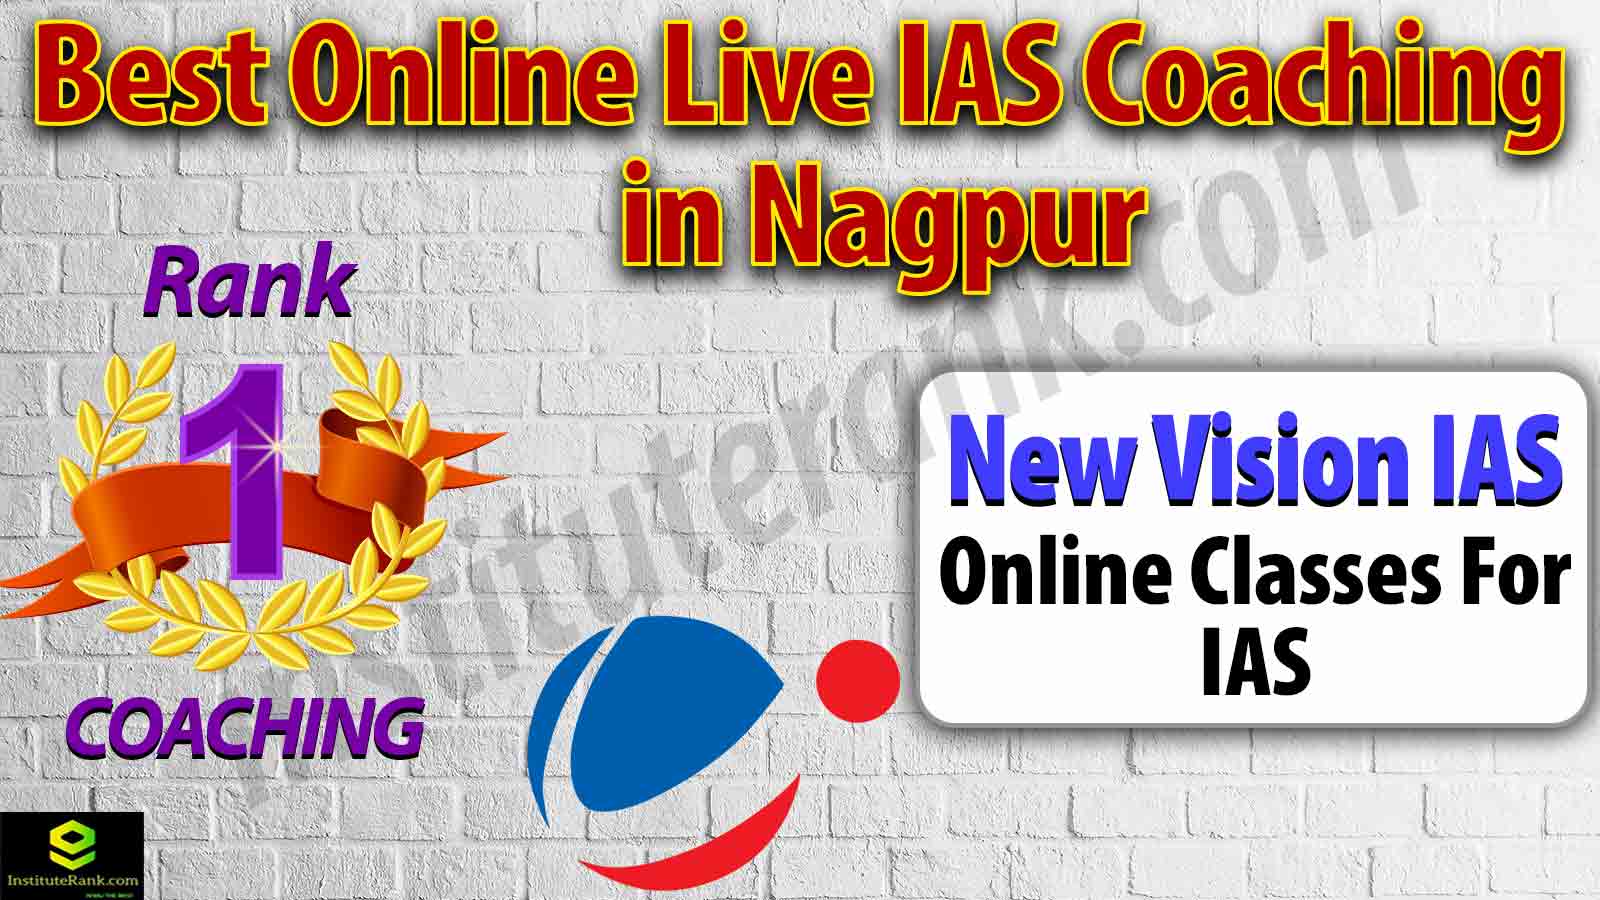 Top Online live IAS Coaching in Nagpur